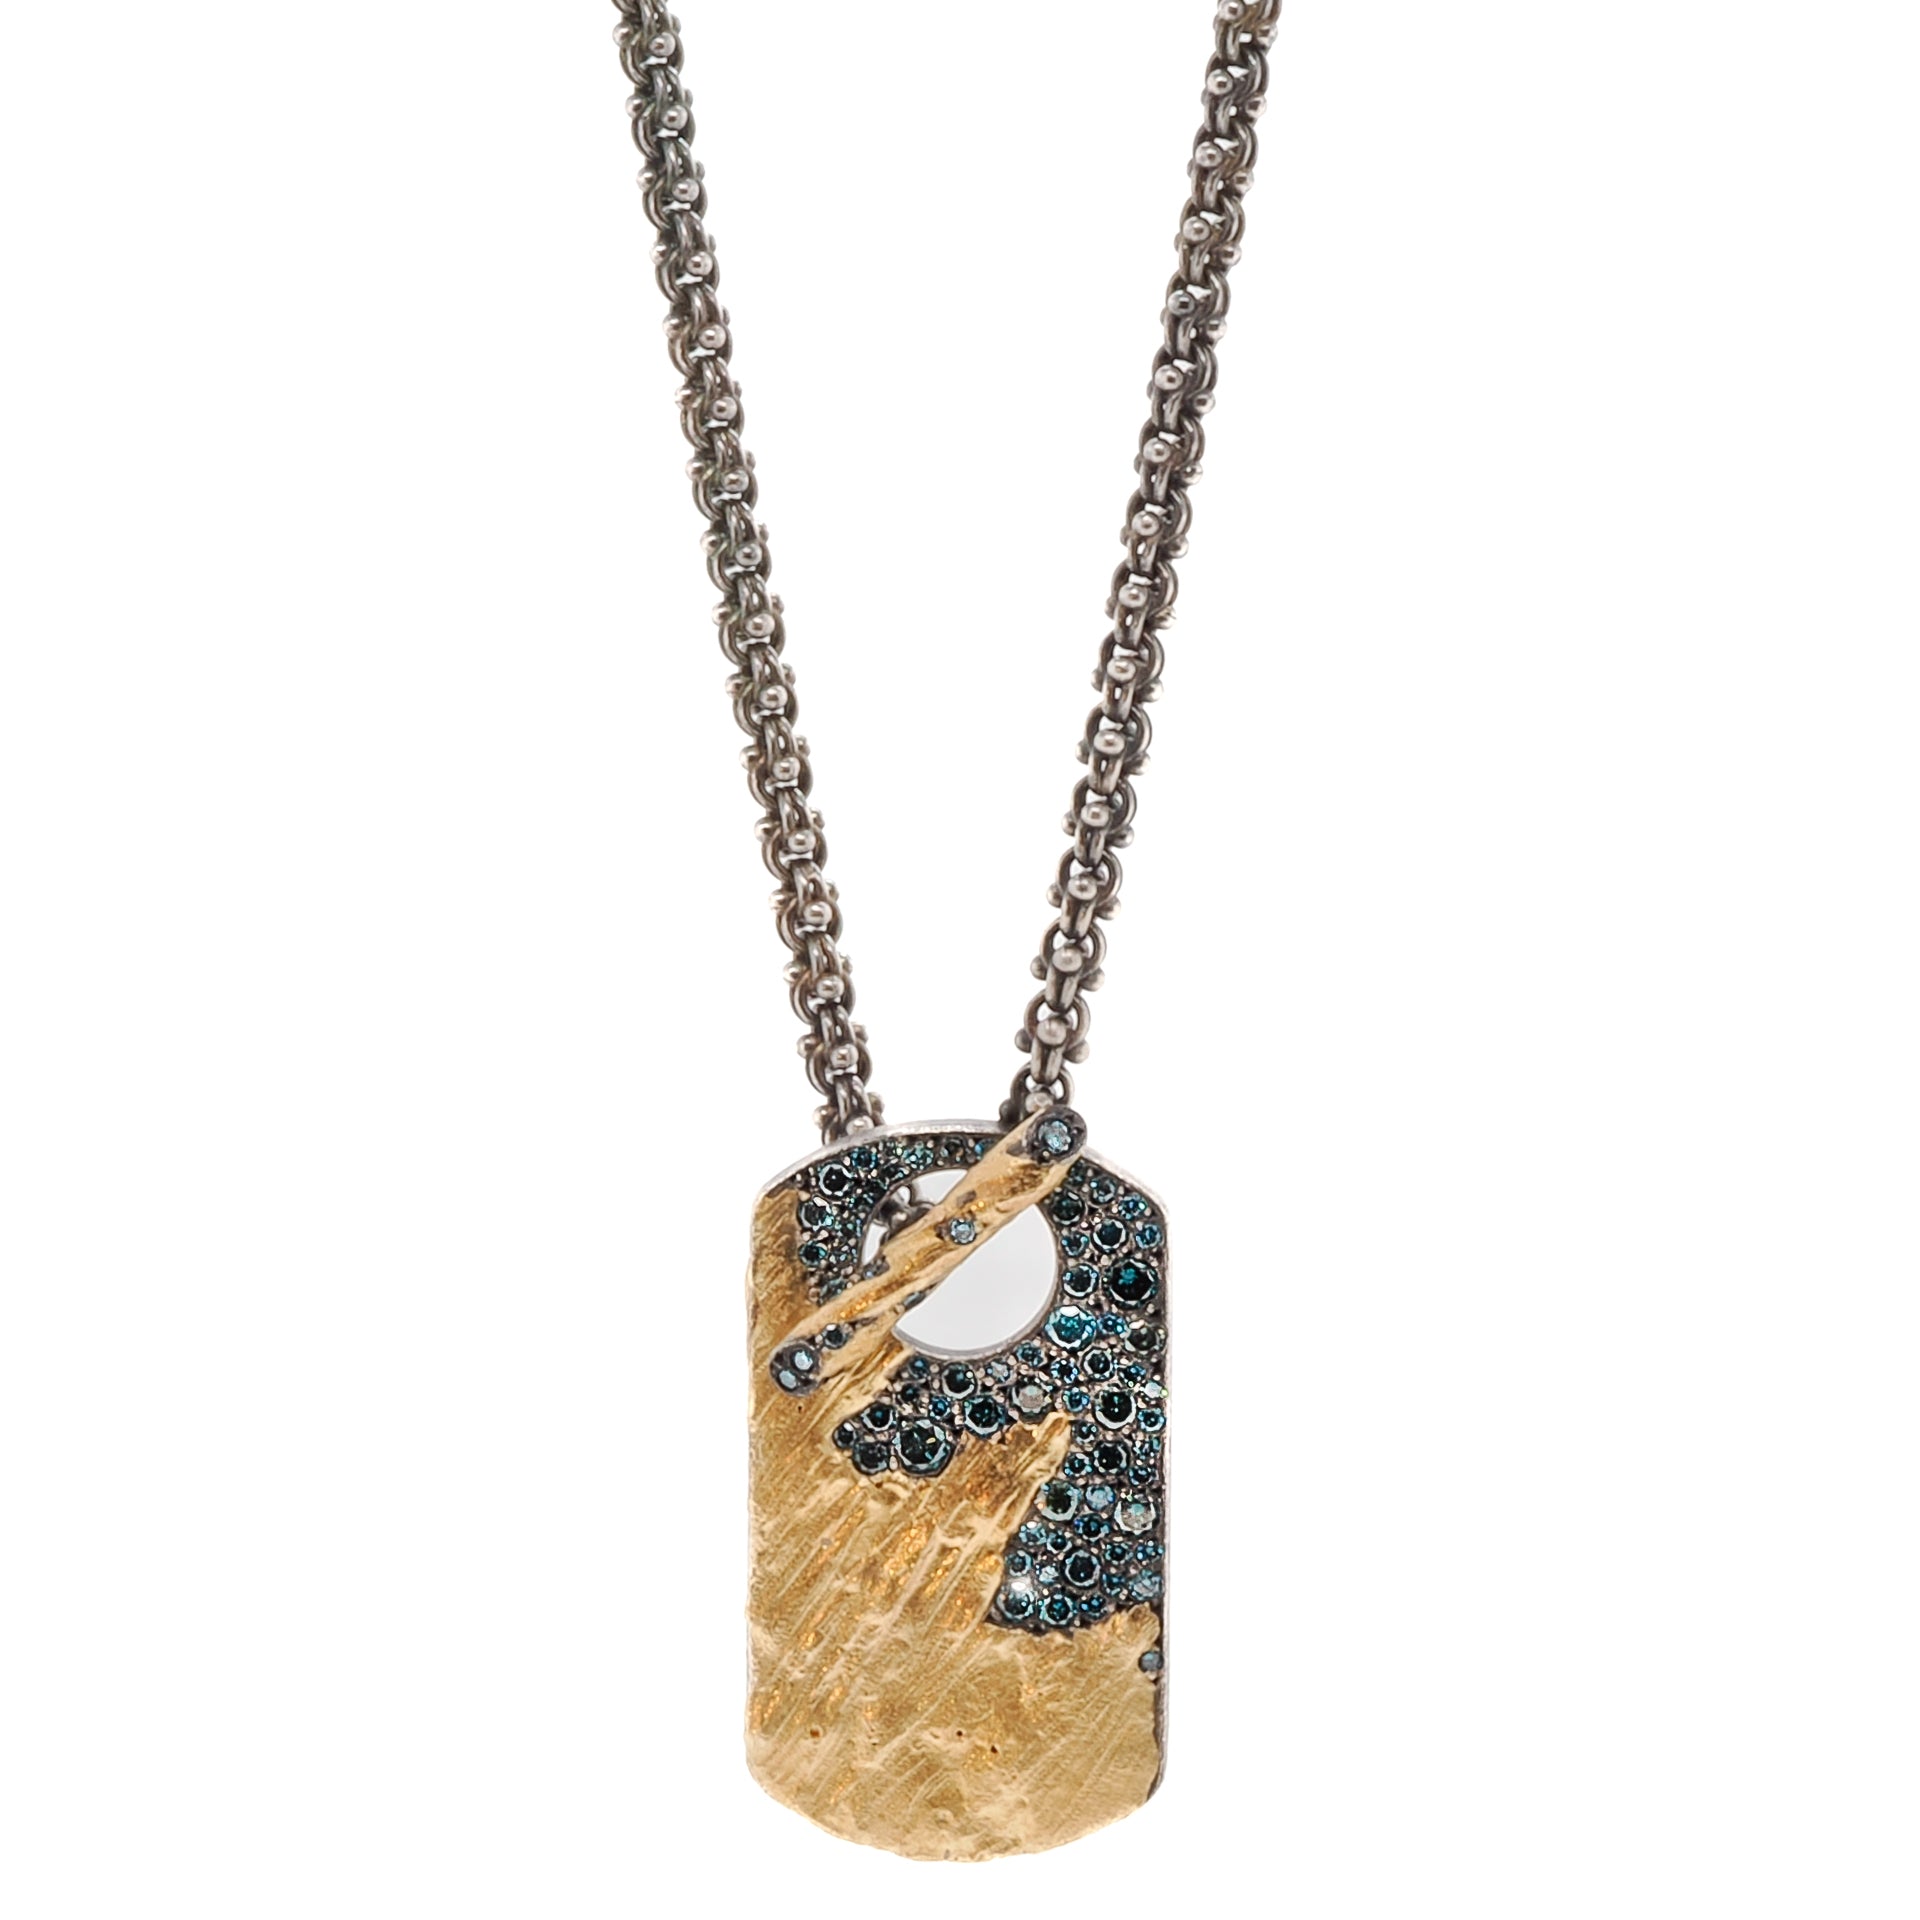 Recycled Luxury - Sustainable jewelry with a touch of opulence.